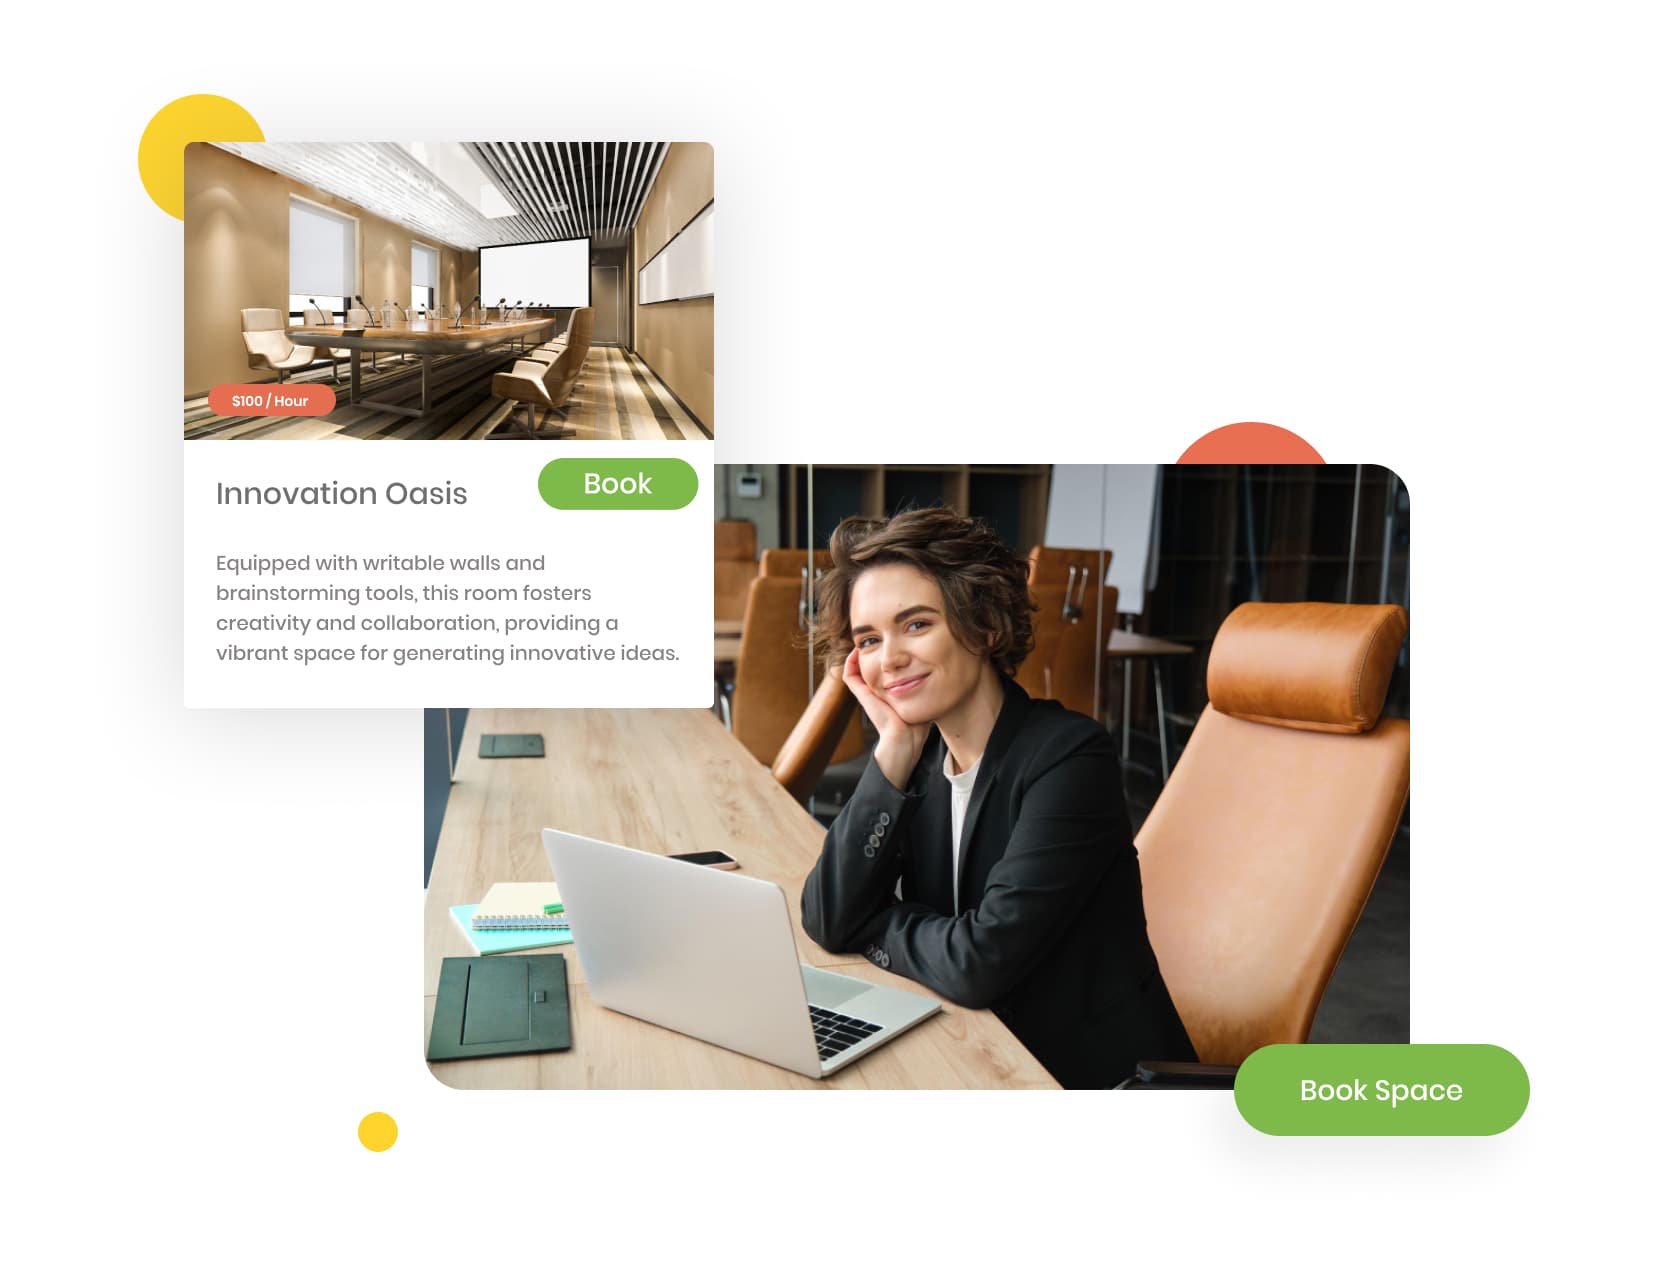 the description of specific meeting room available for rental next to an image of a professional young woman with short brown hair.